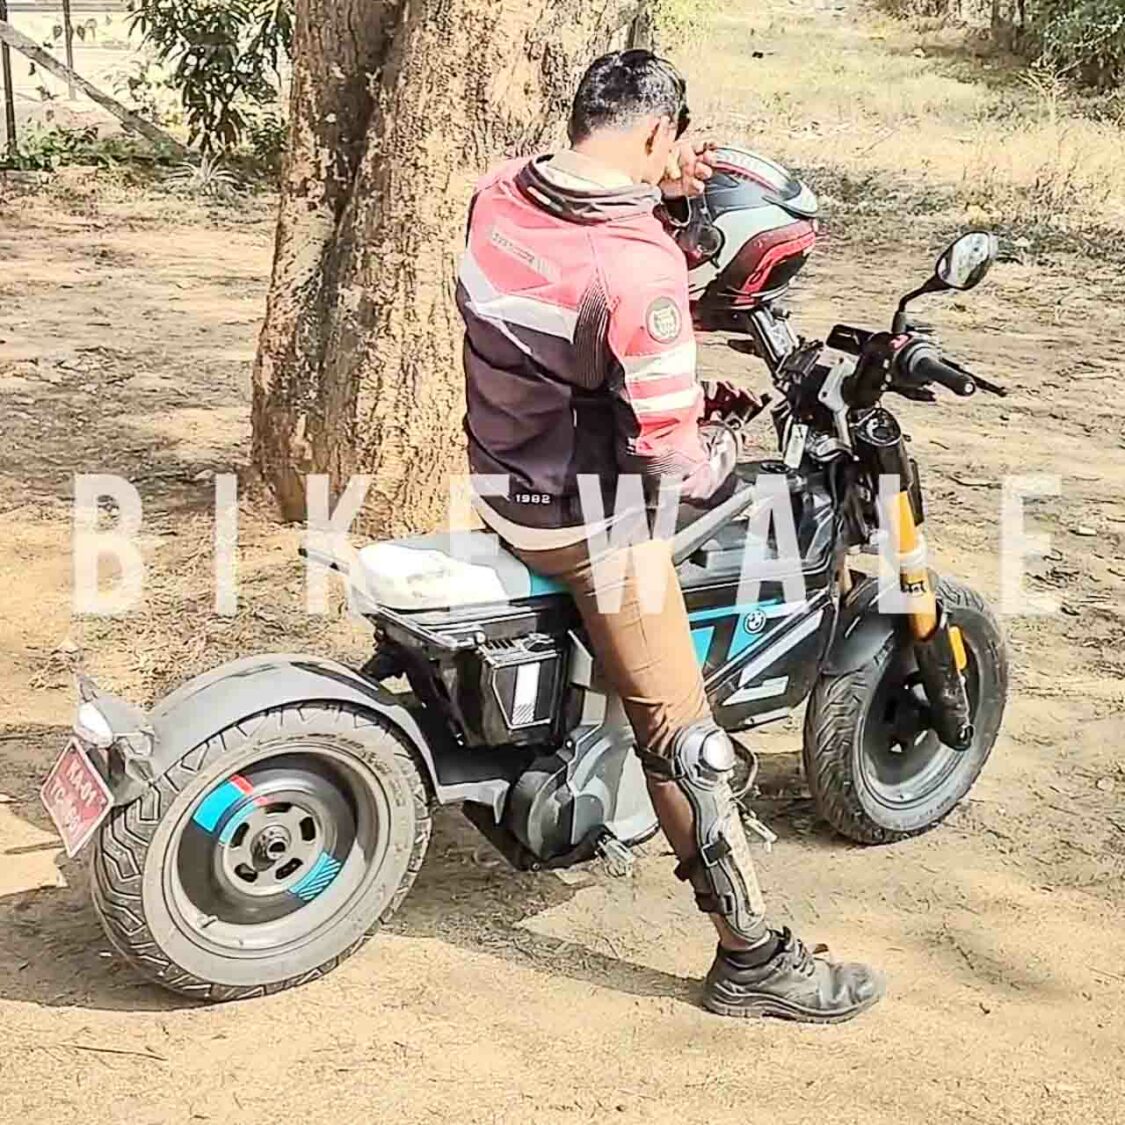 New BMW Electric Scooter for India - Spied